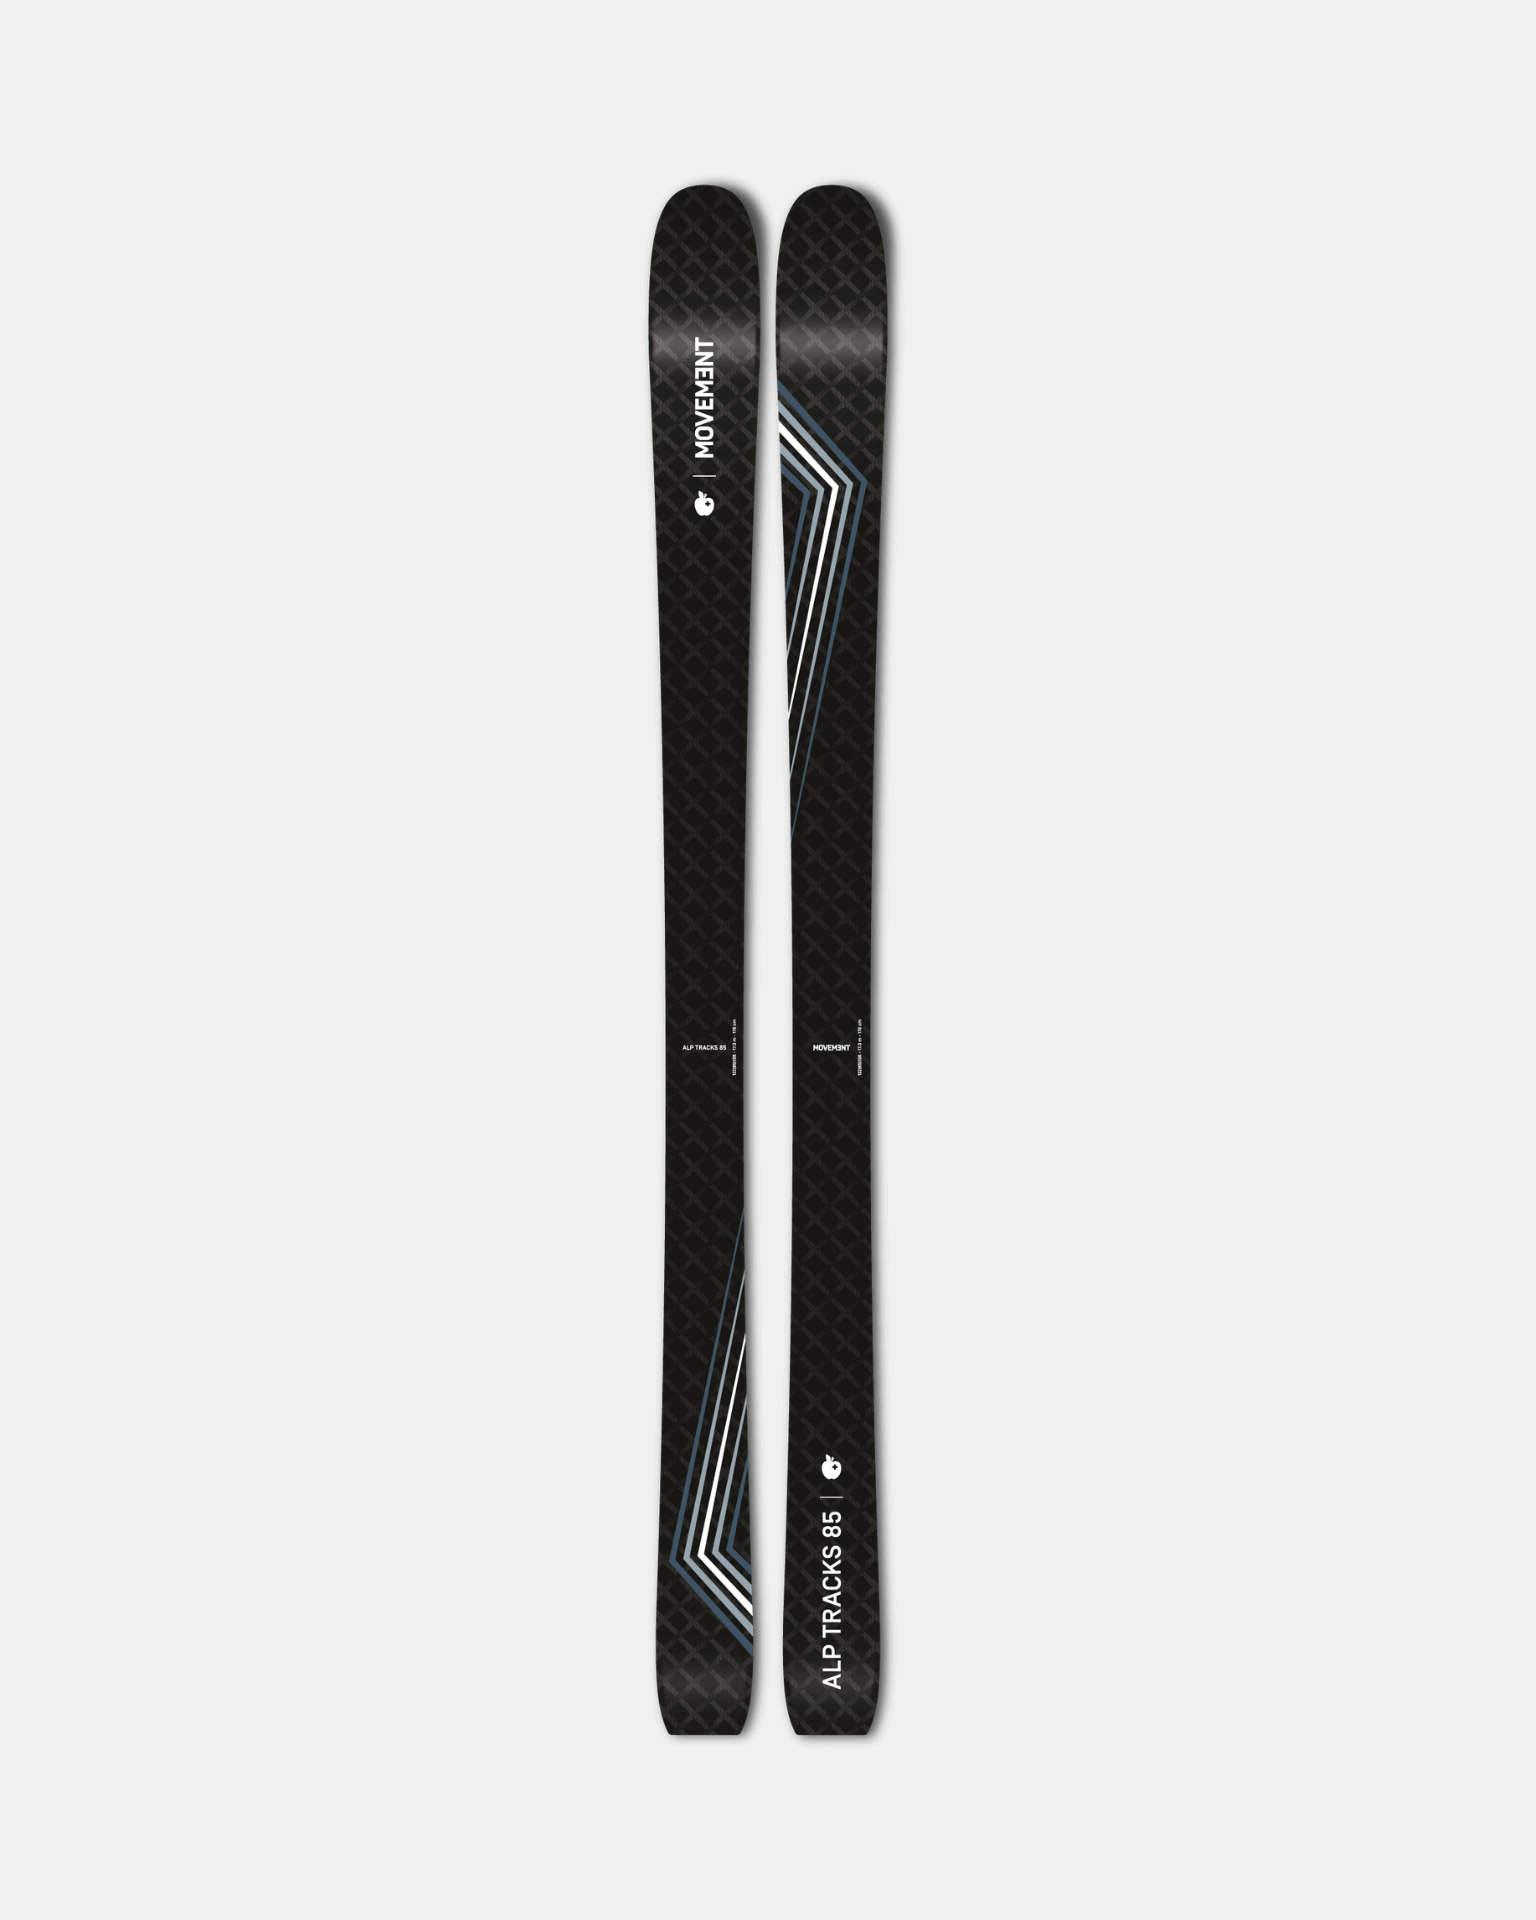 Discover the ultimate touring companion in Movement's Alp Tracks 85 skis.